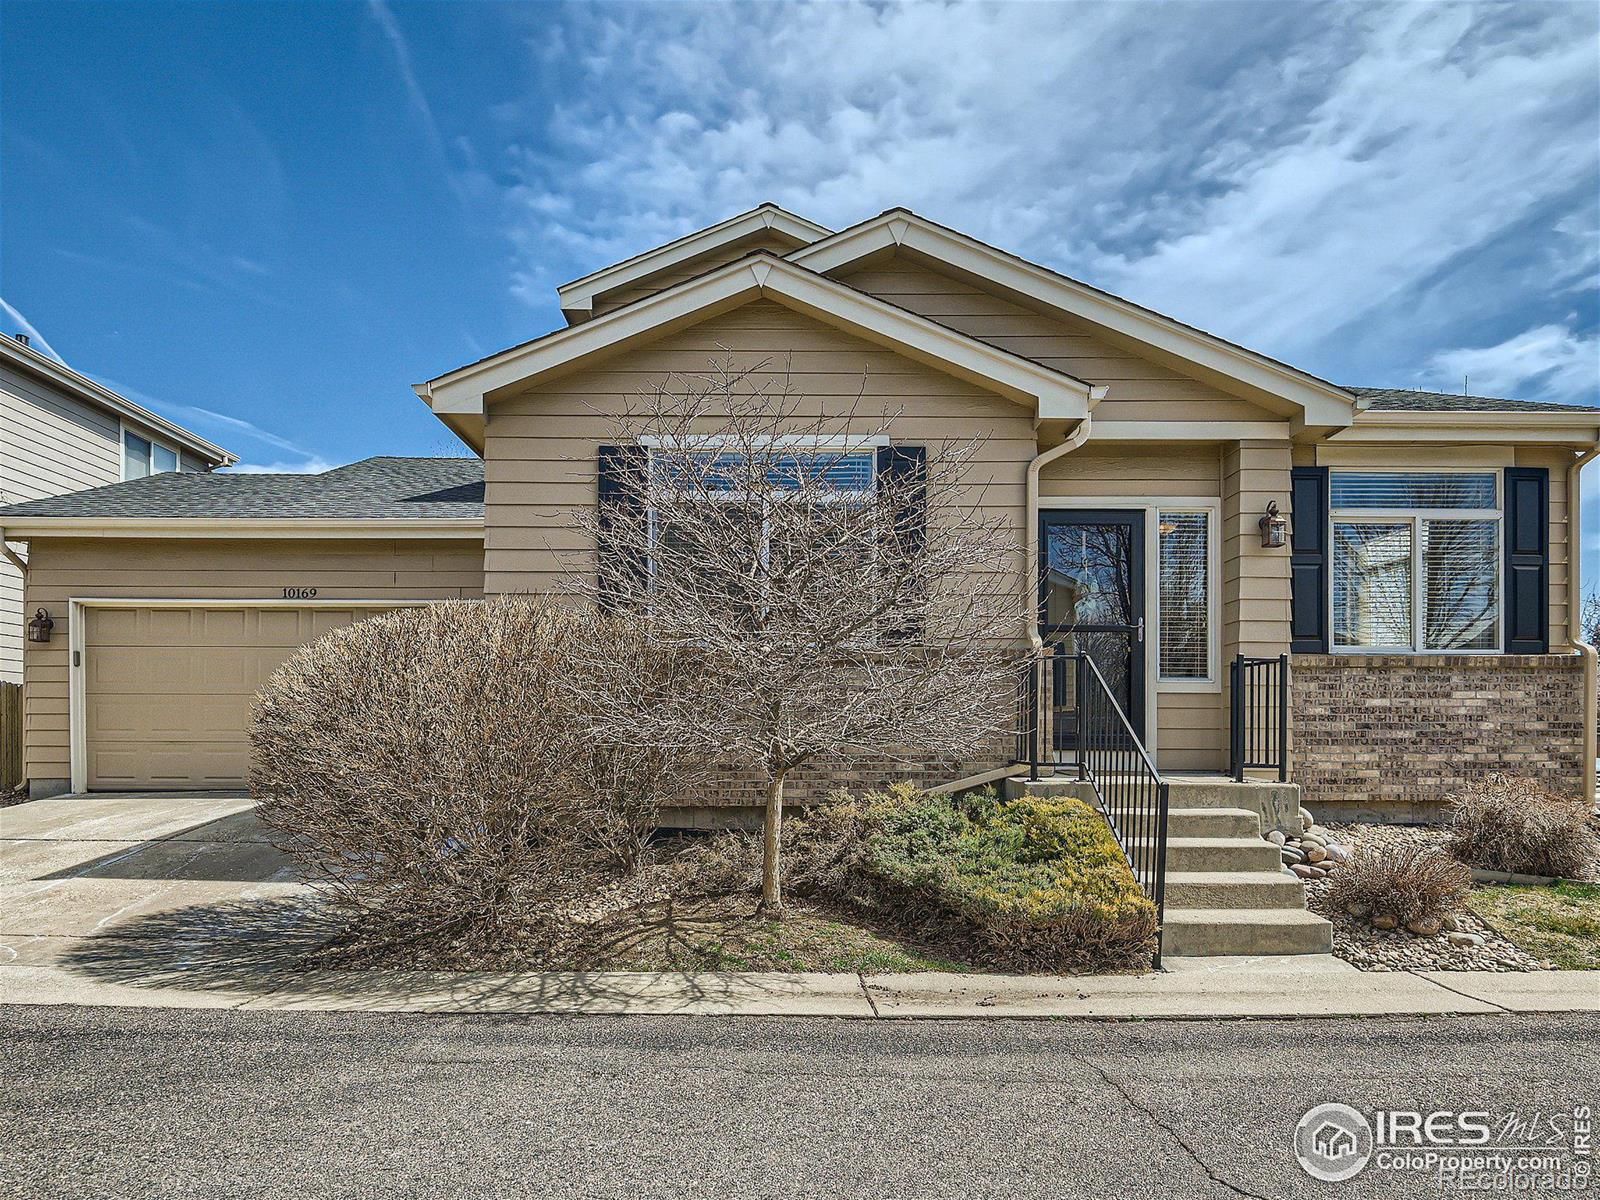 10169  wyandott circle, thornton sold home. Closed on 2023-05-22 for $525,000.